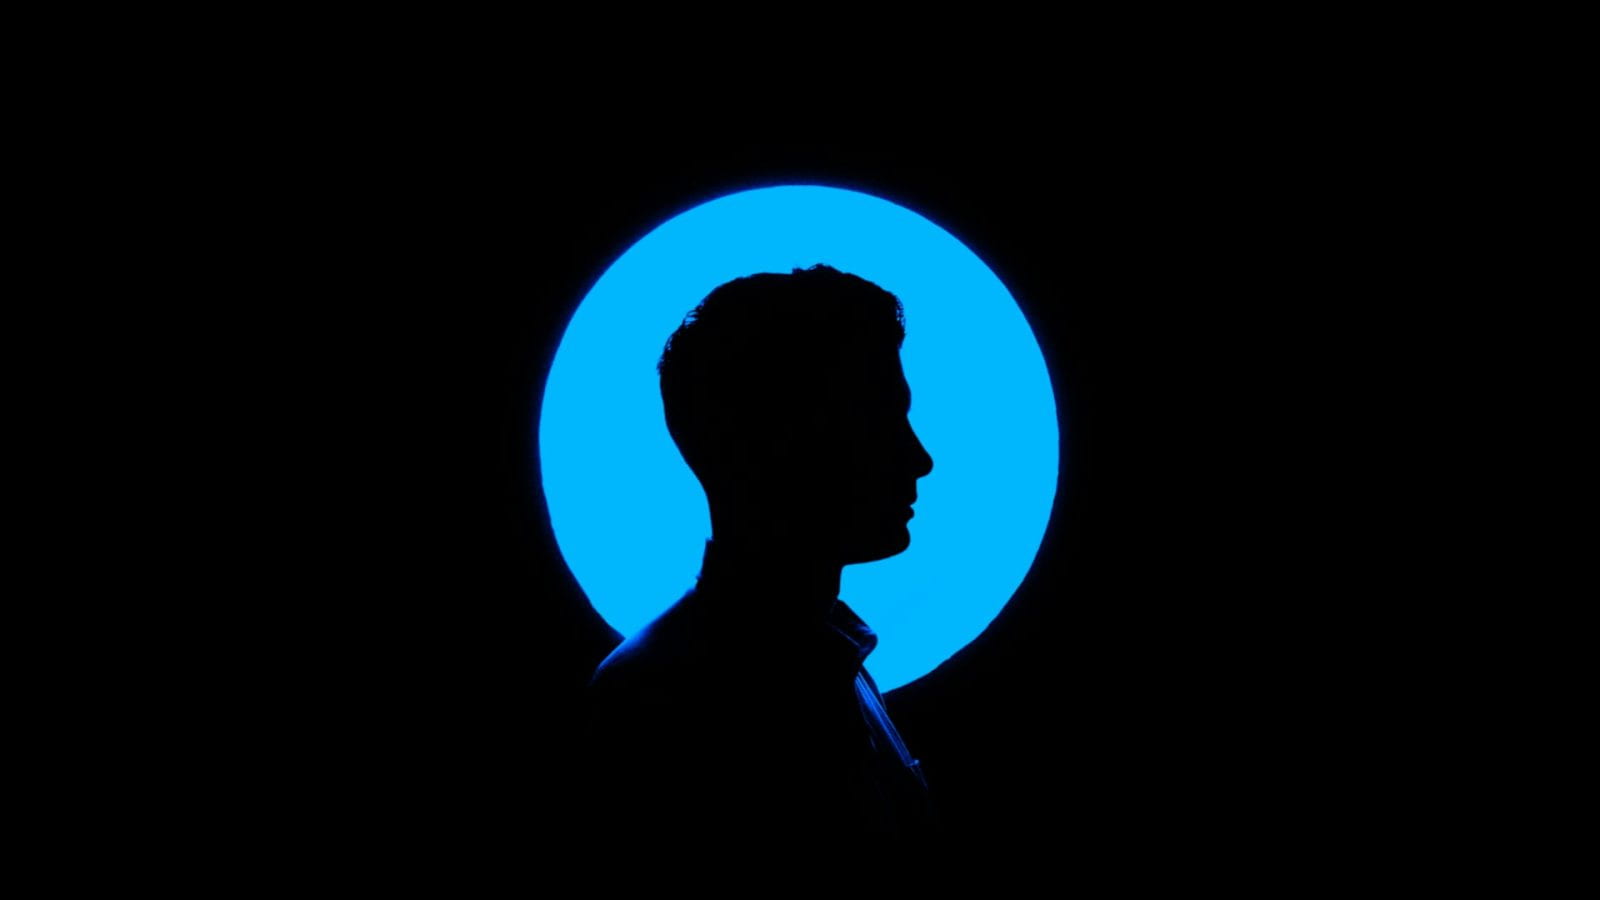 profile view of man's face on blue background